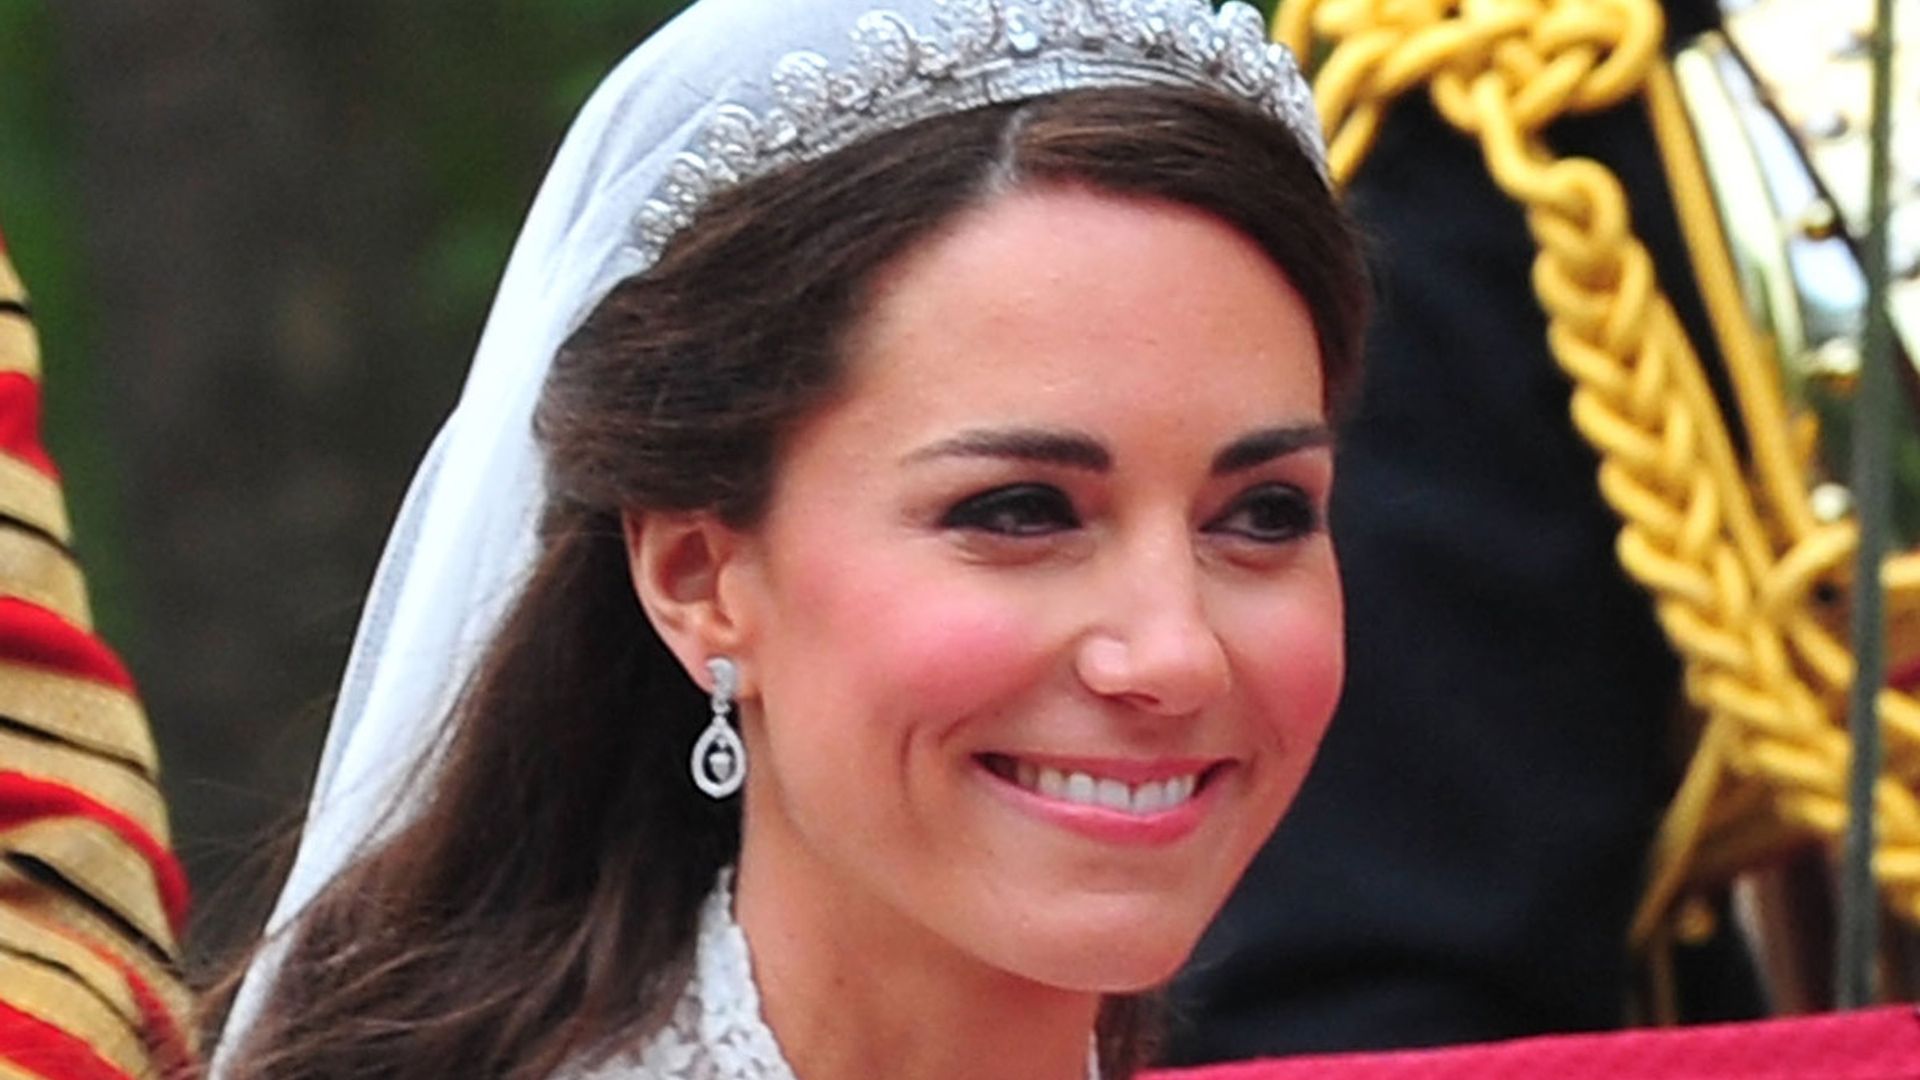 Kate Middleton's stunning hairstyle is just like her bridal look – wow